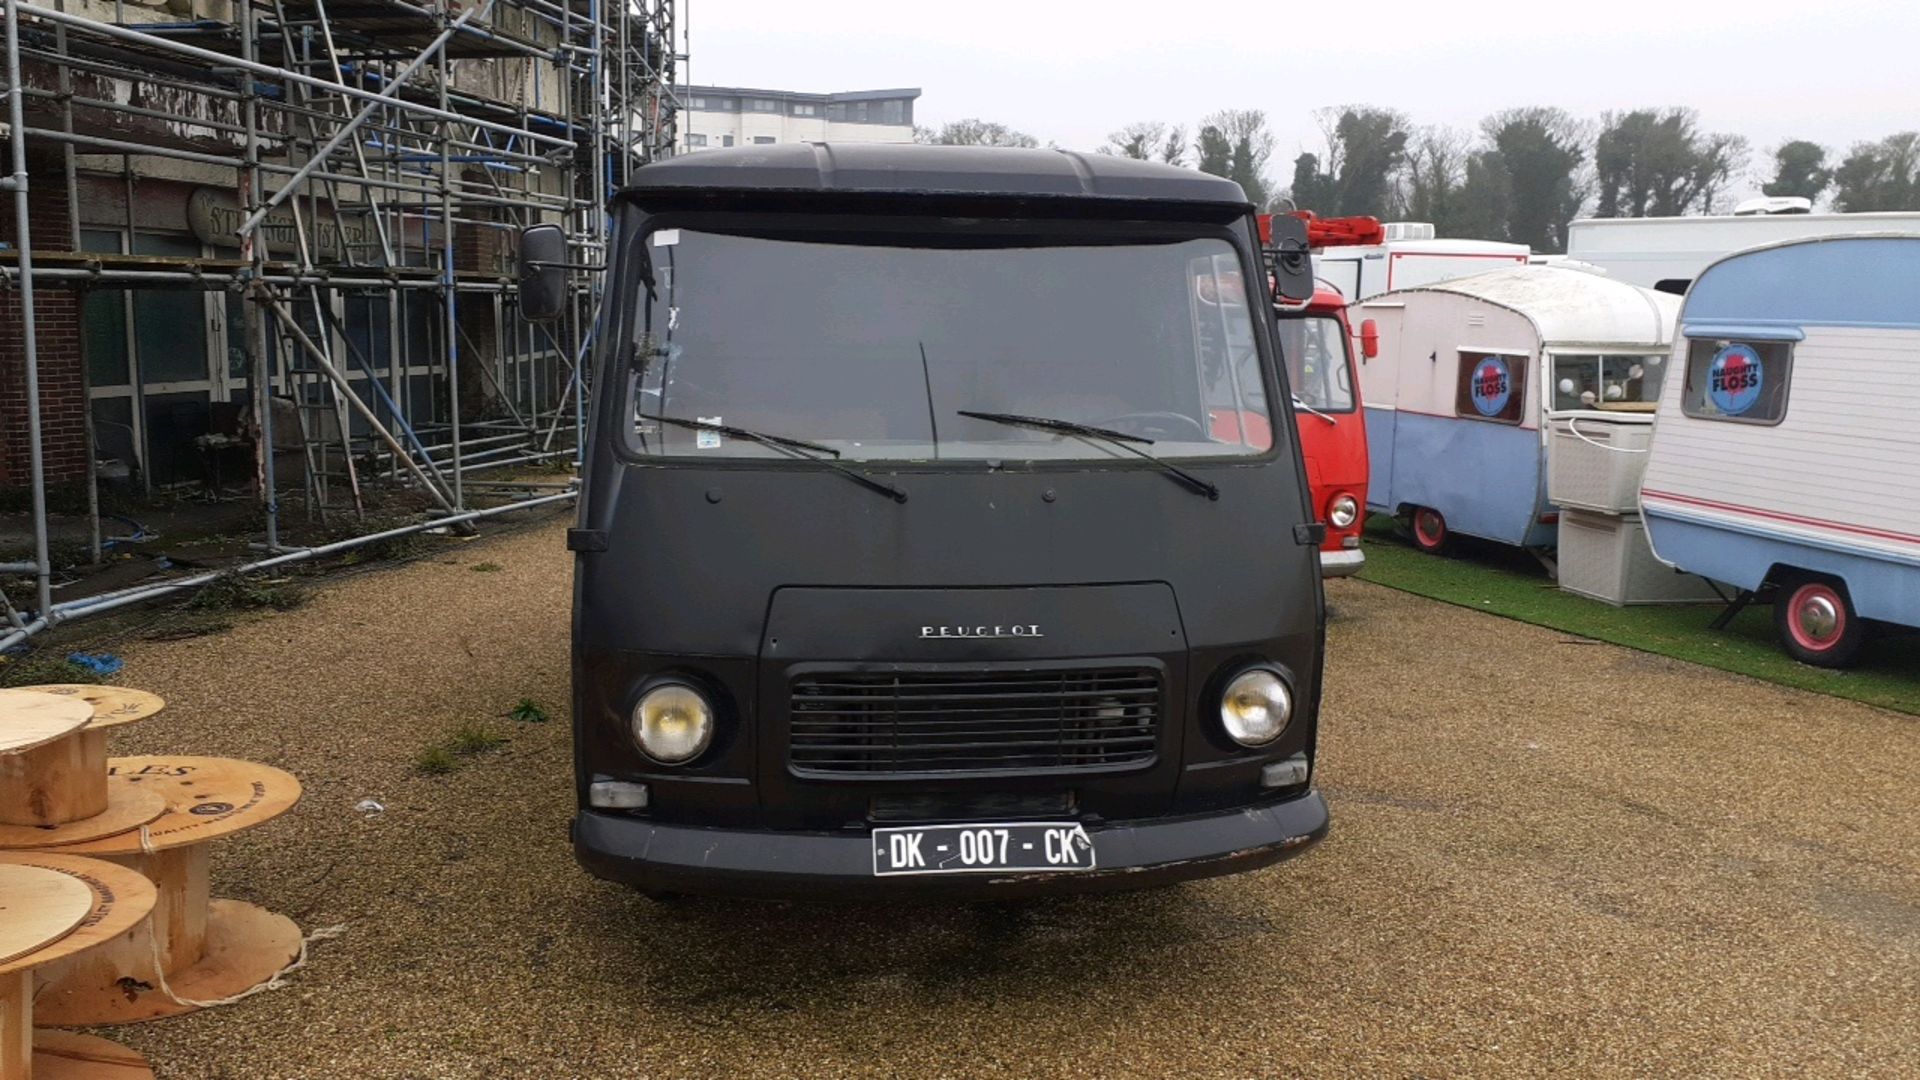 Classic Peugeot Converted Catering Van - Image 2 of 10